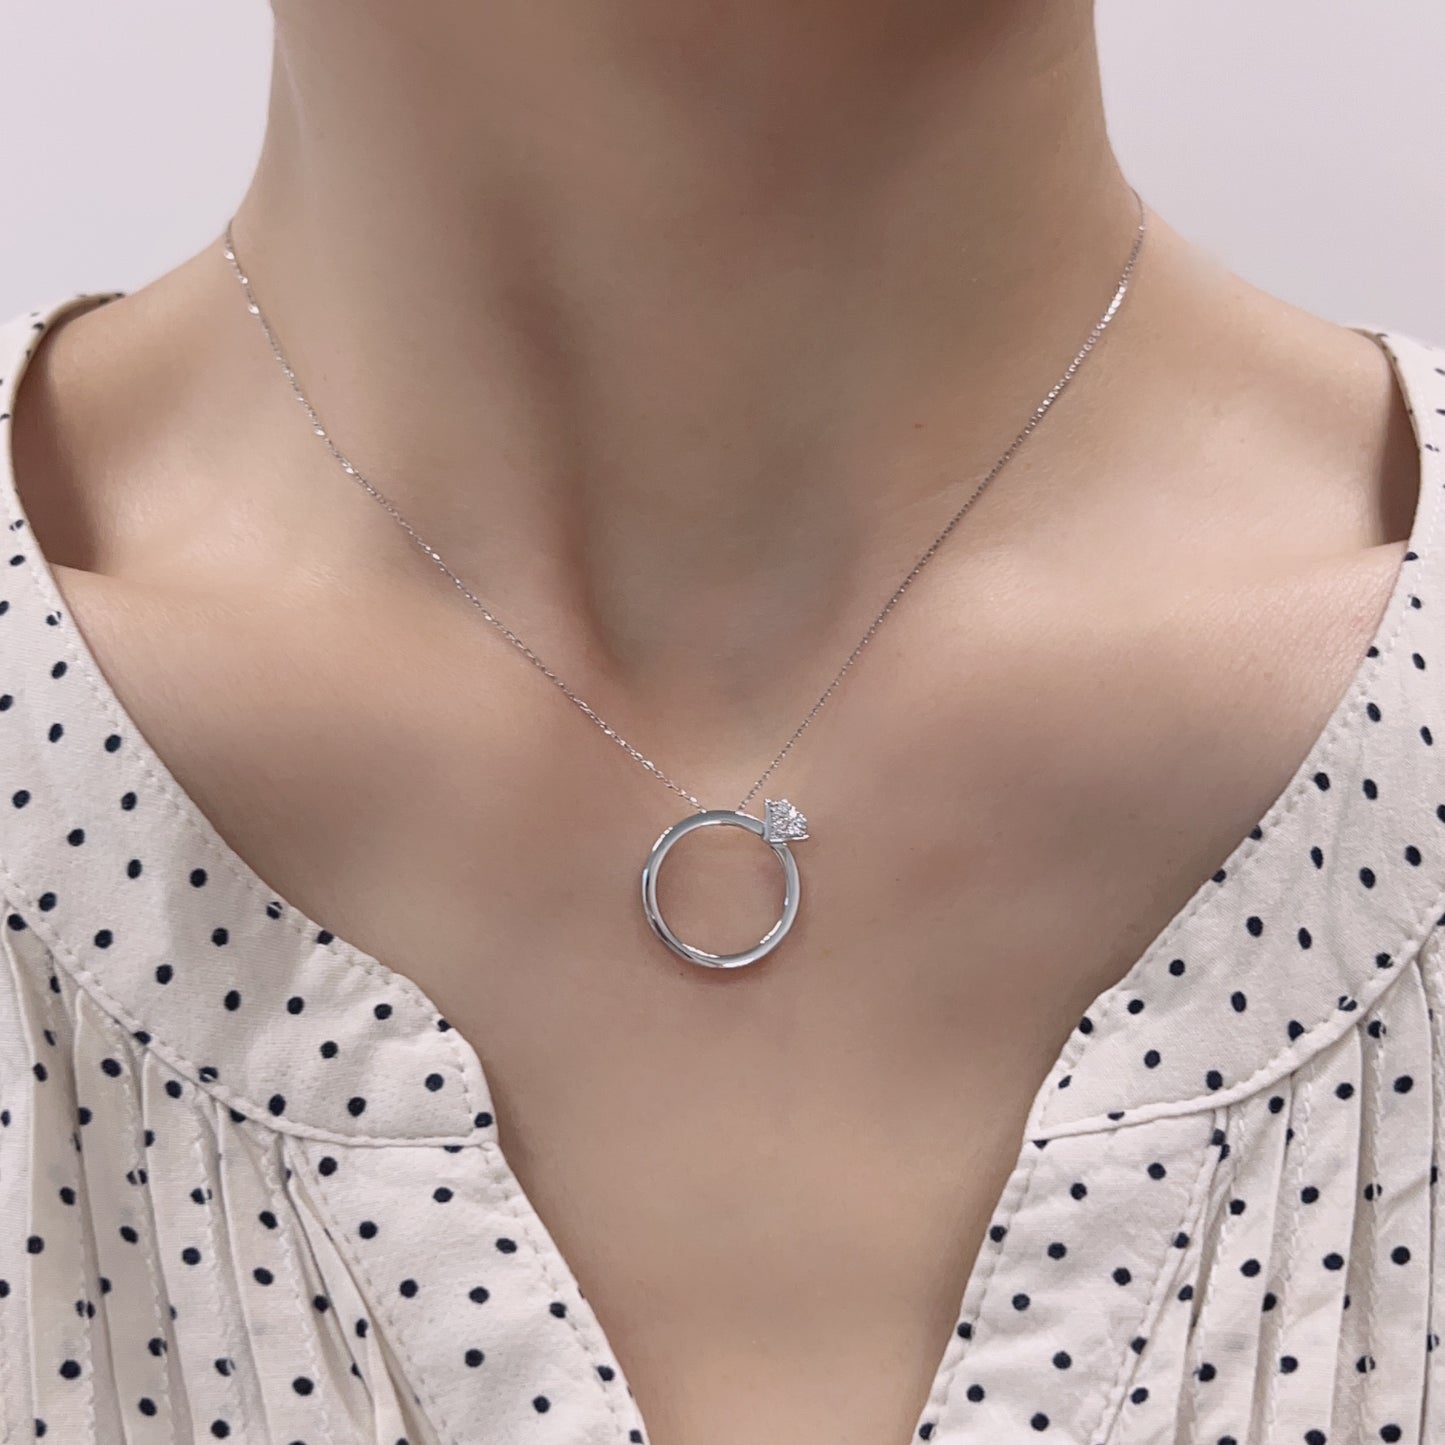 Ring Pendant Necklace B 0.03ct